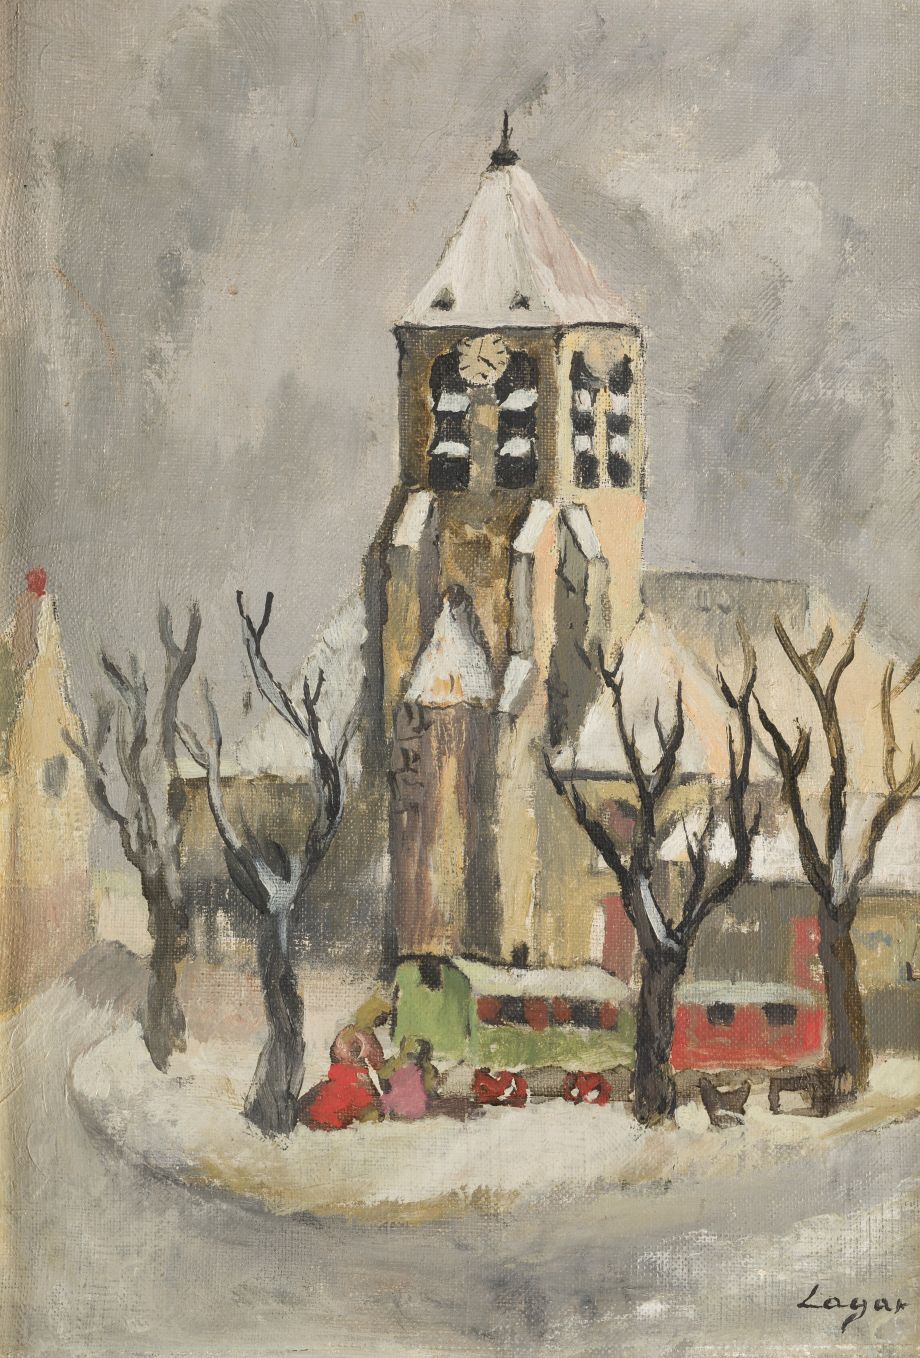 CELSO LAGAR (1891 / 1966) "Rouloutes in front of the church" Firmado en la esqui&hellip;